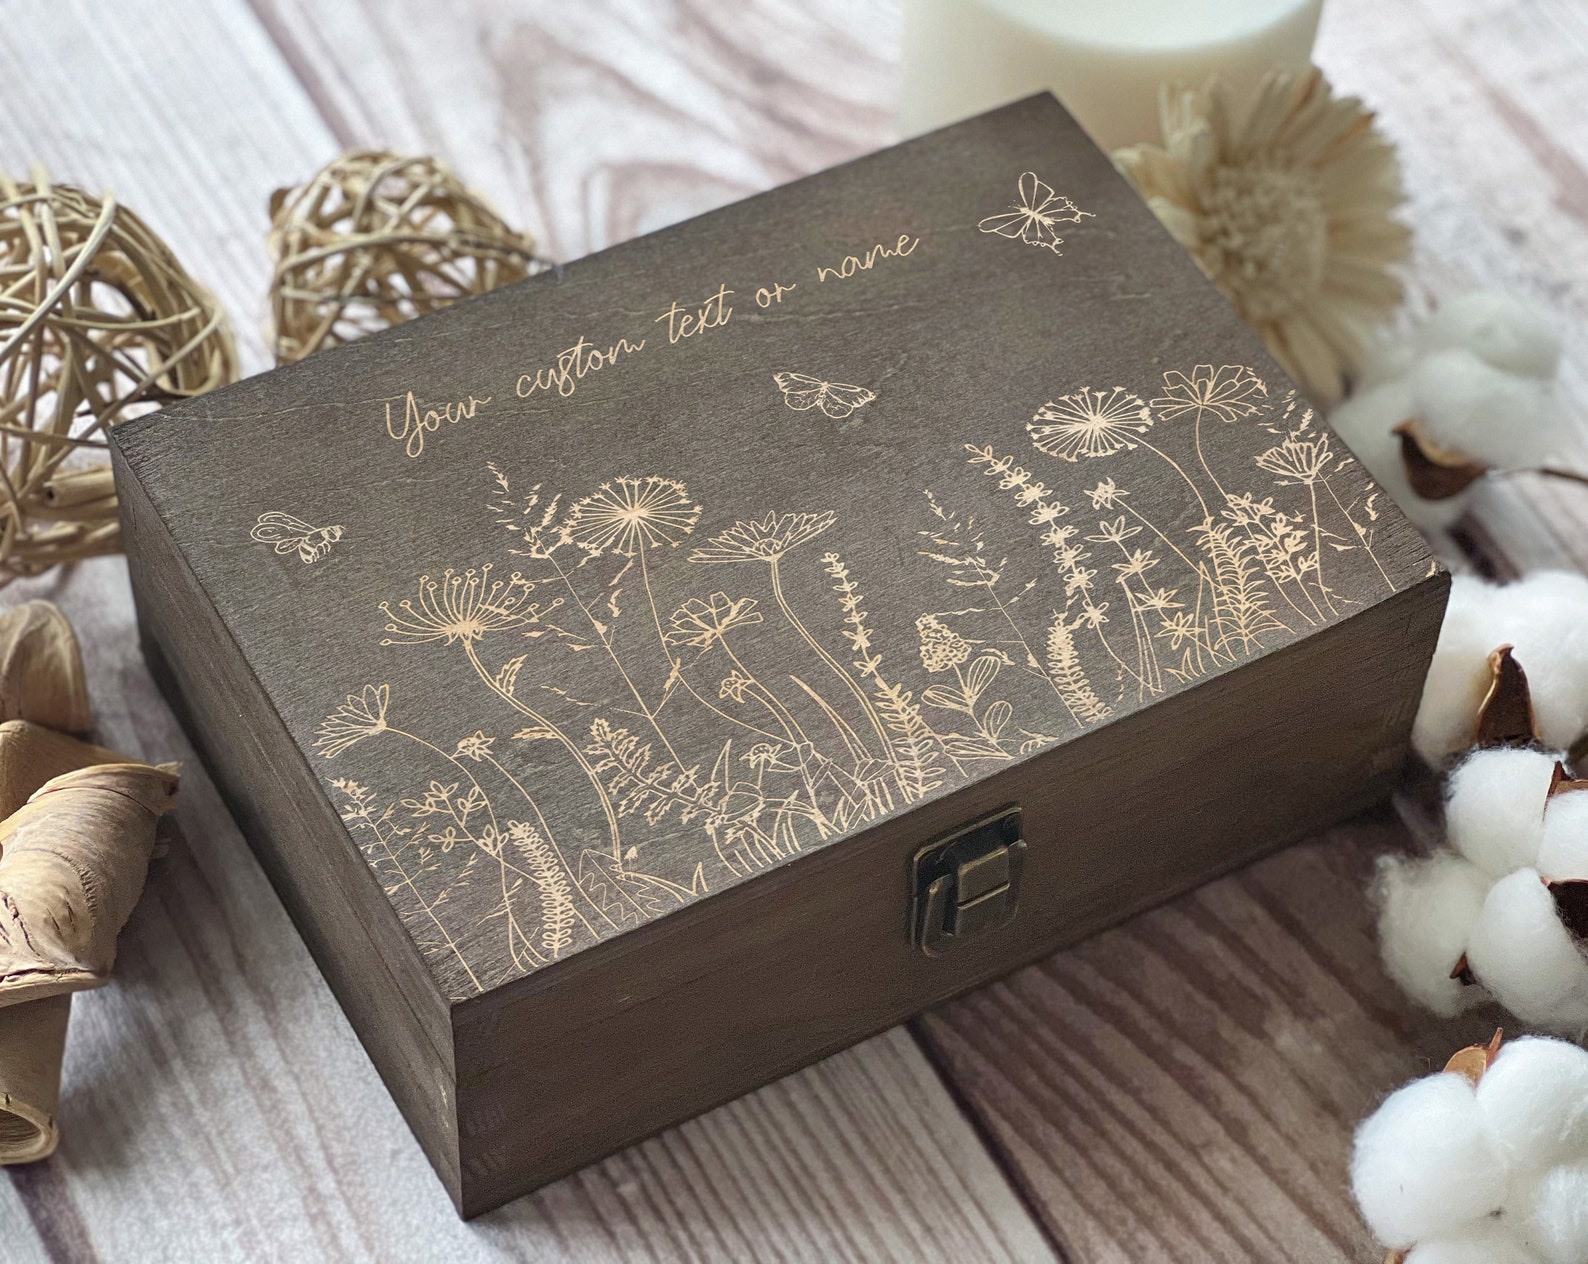 Flowers and Butterflies Personalized Wooden Box Love Gift - Etsy